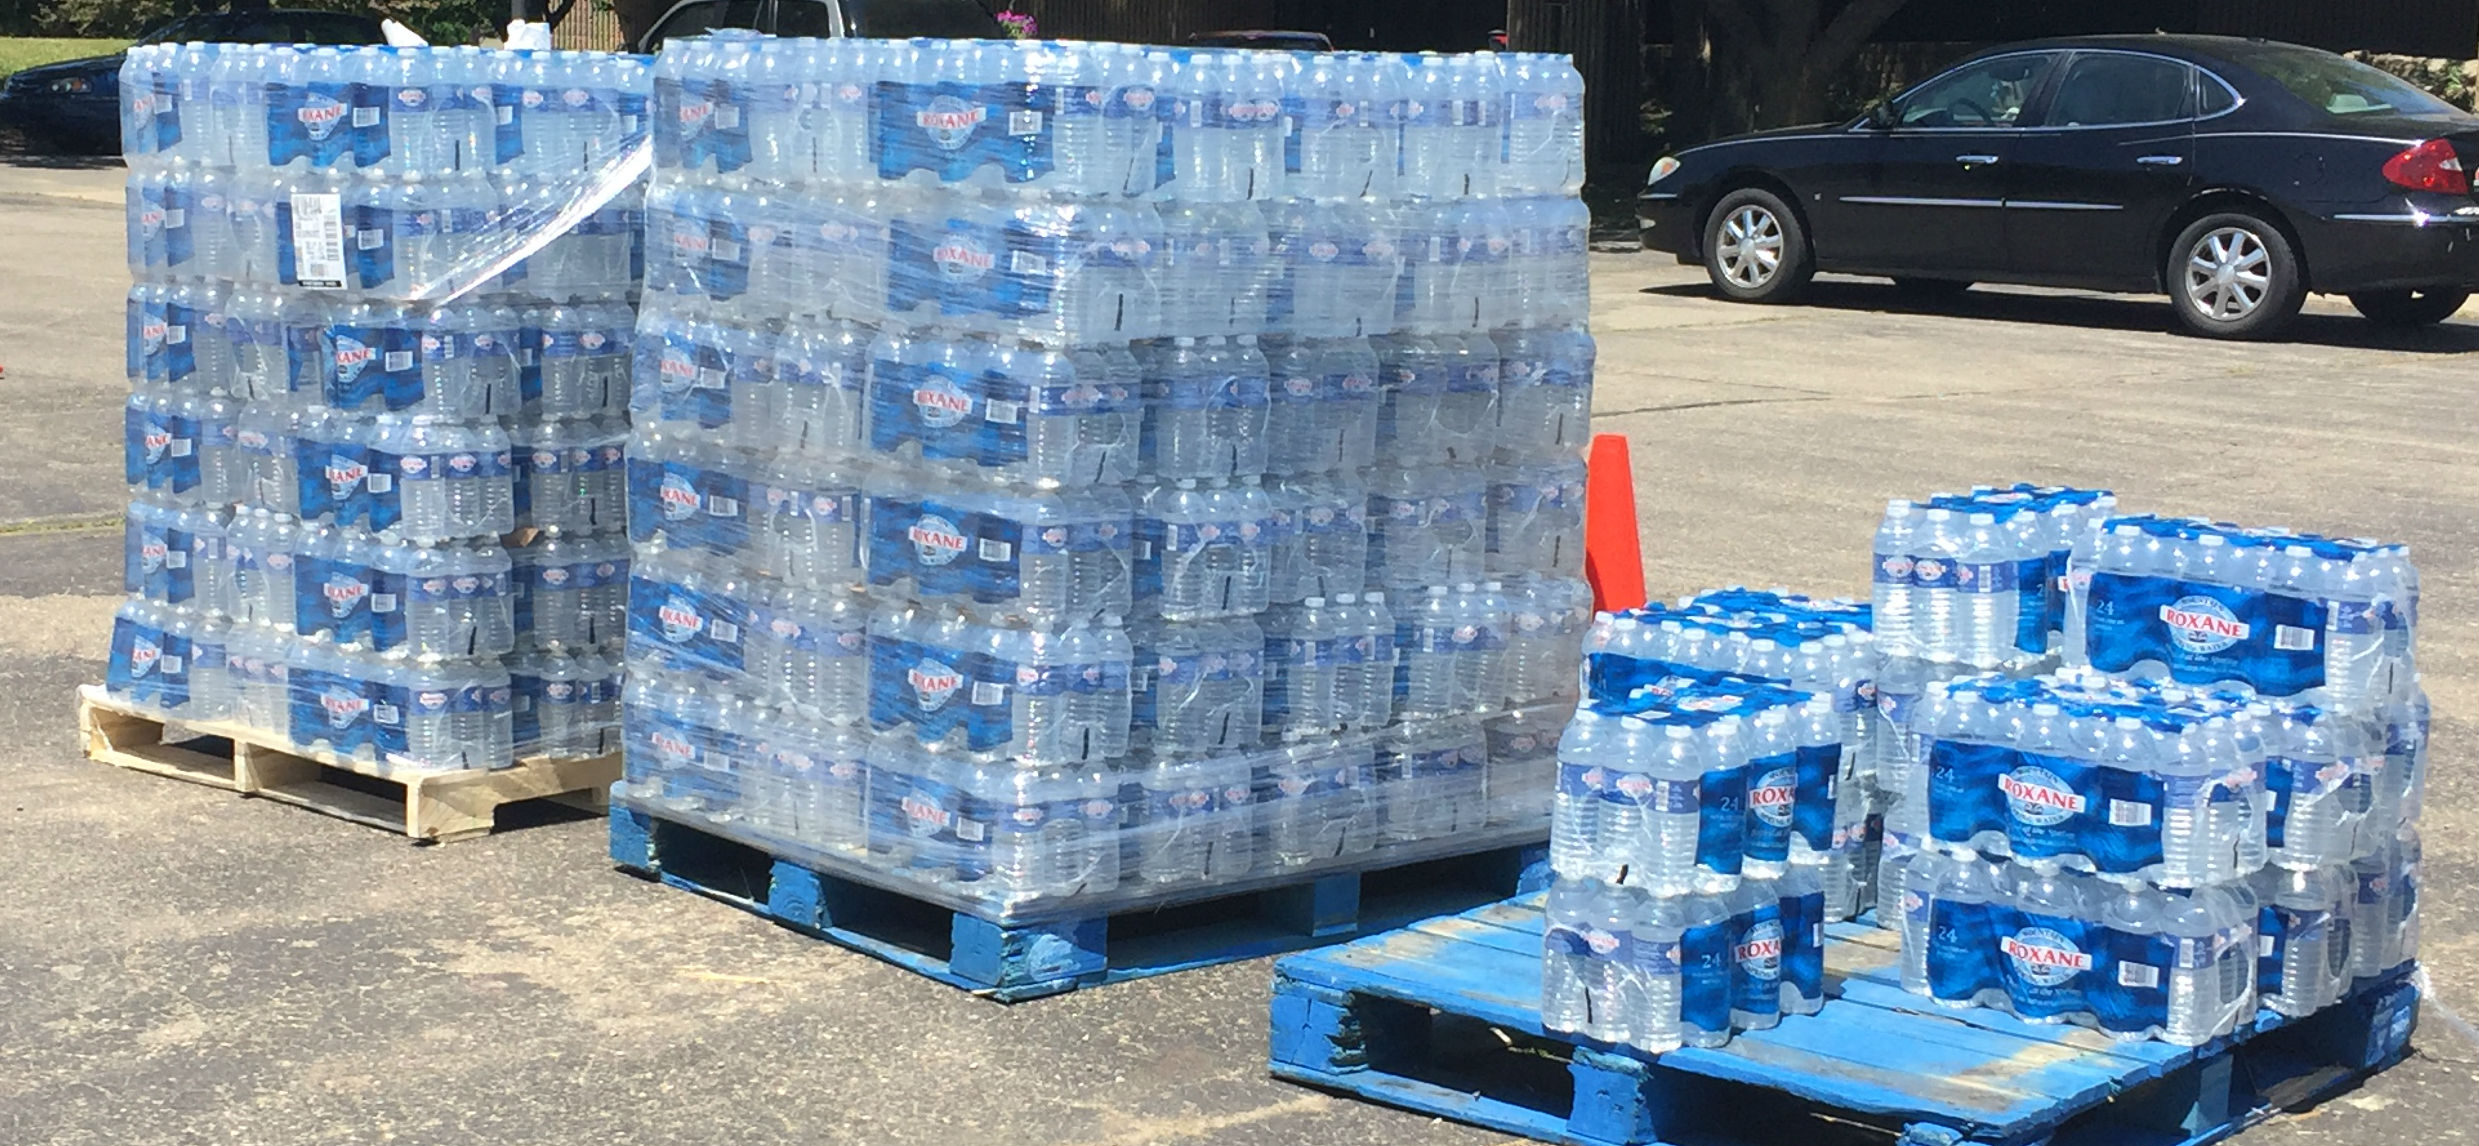 Cases of water to aid Flint Water Crisis.